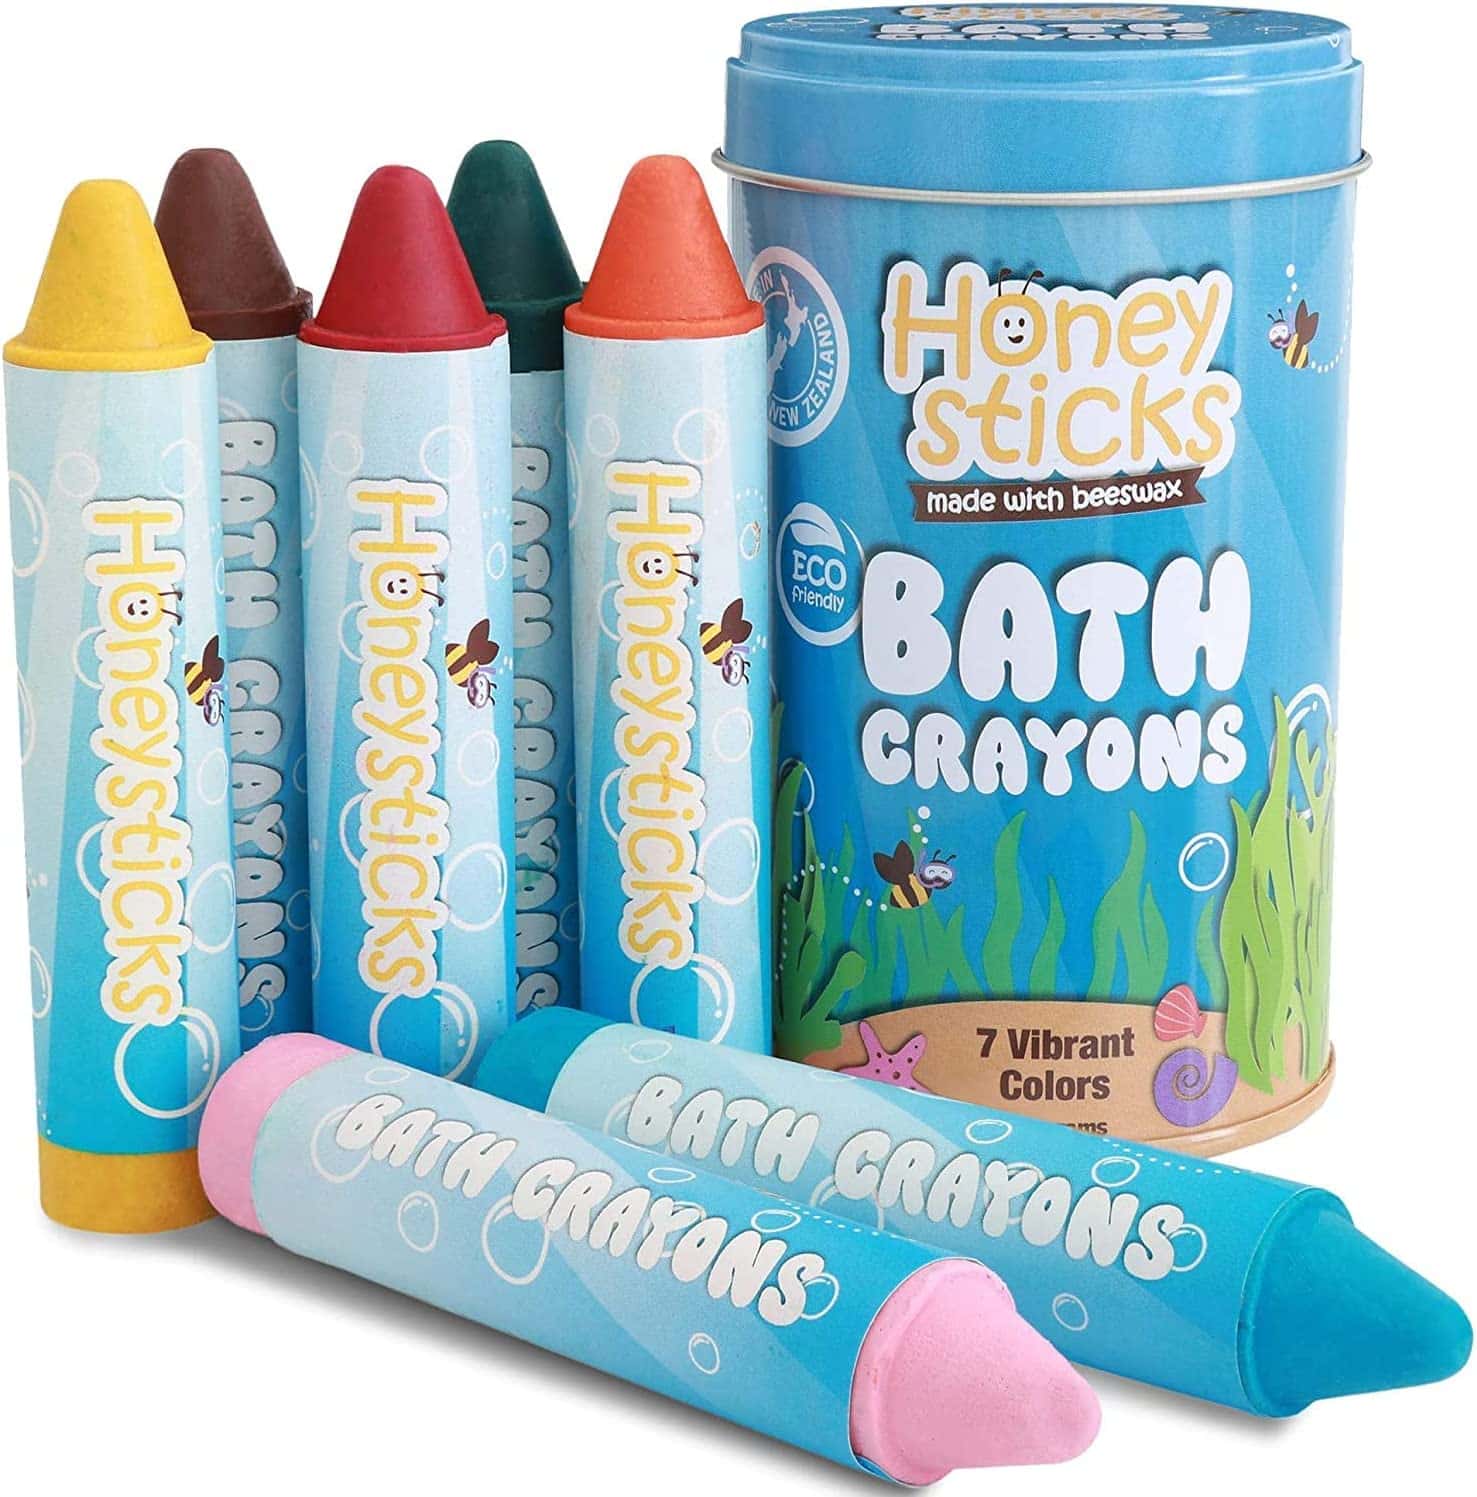 A container with bath crayons in an assortment of colors standing up and laying down next to it. 